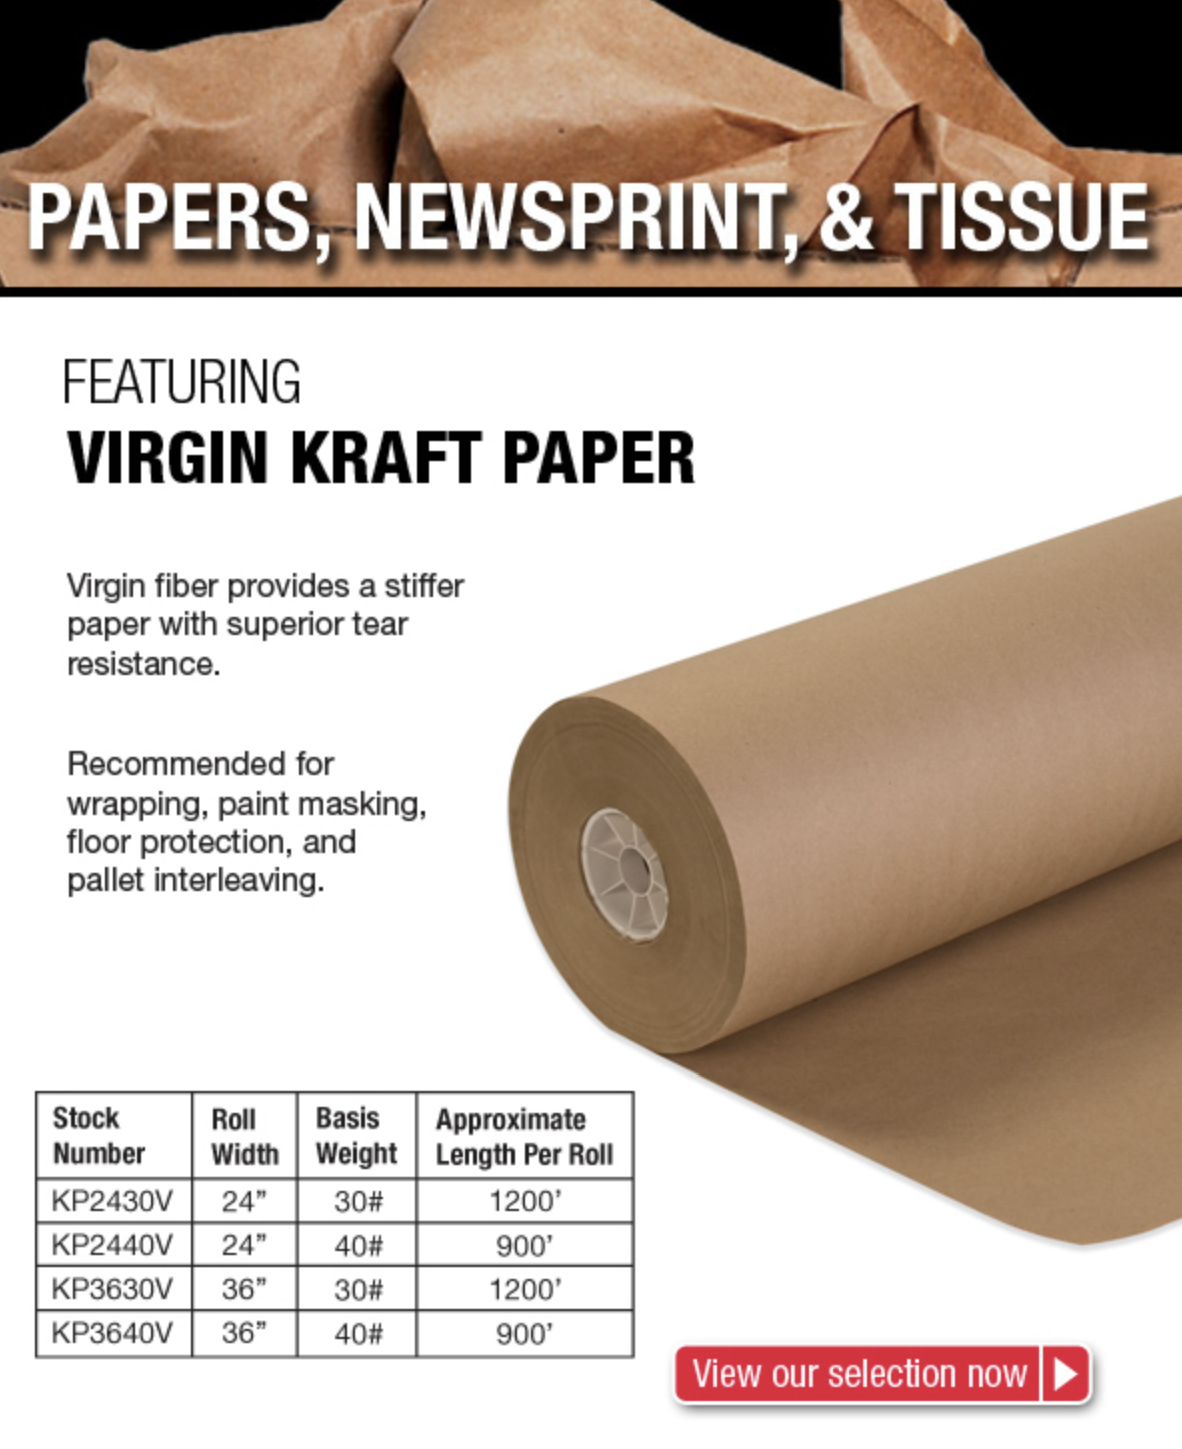 36" 40 lbs 1080' Brown Kraft Paper Roll Shipping Wrapping Cushioning Void Fill 